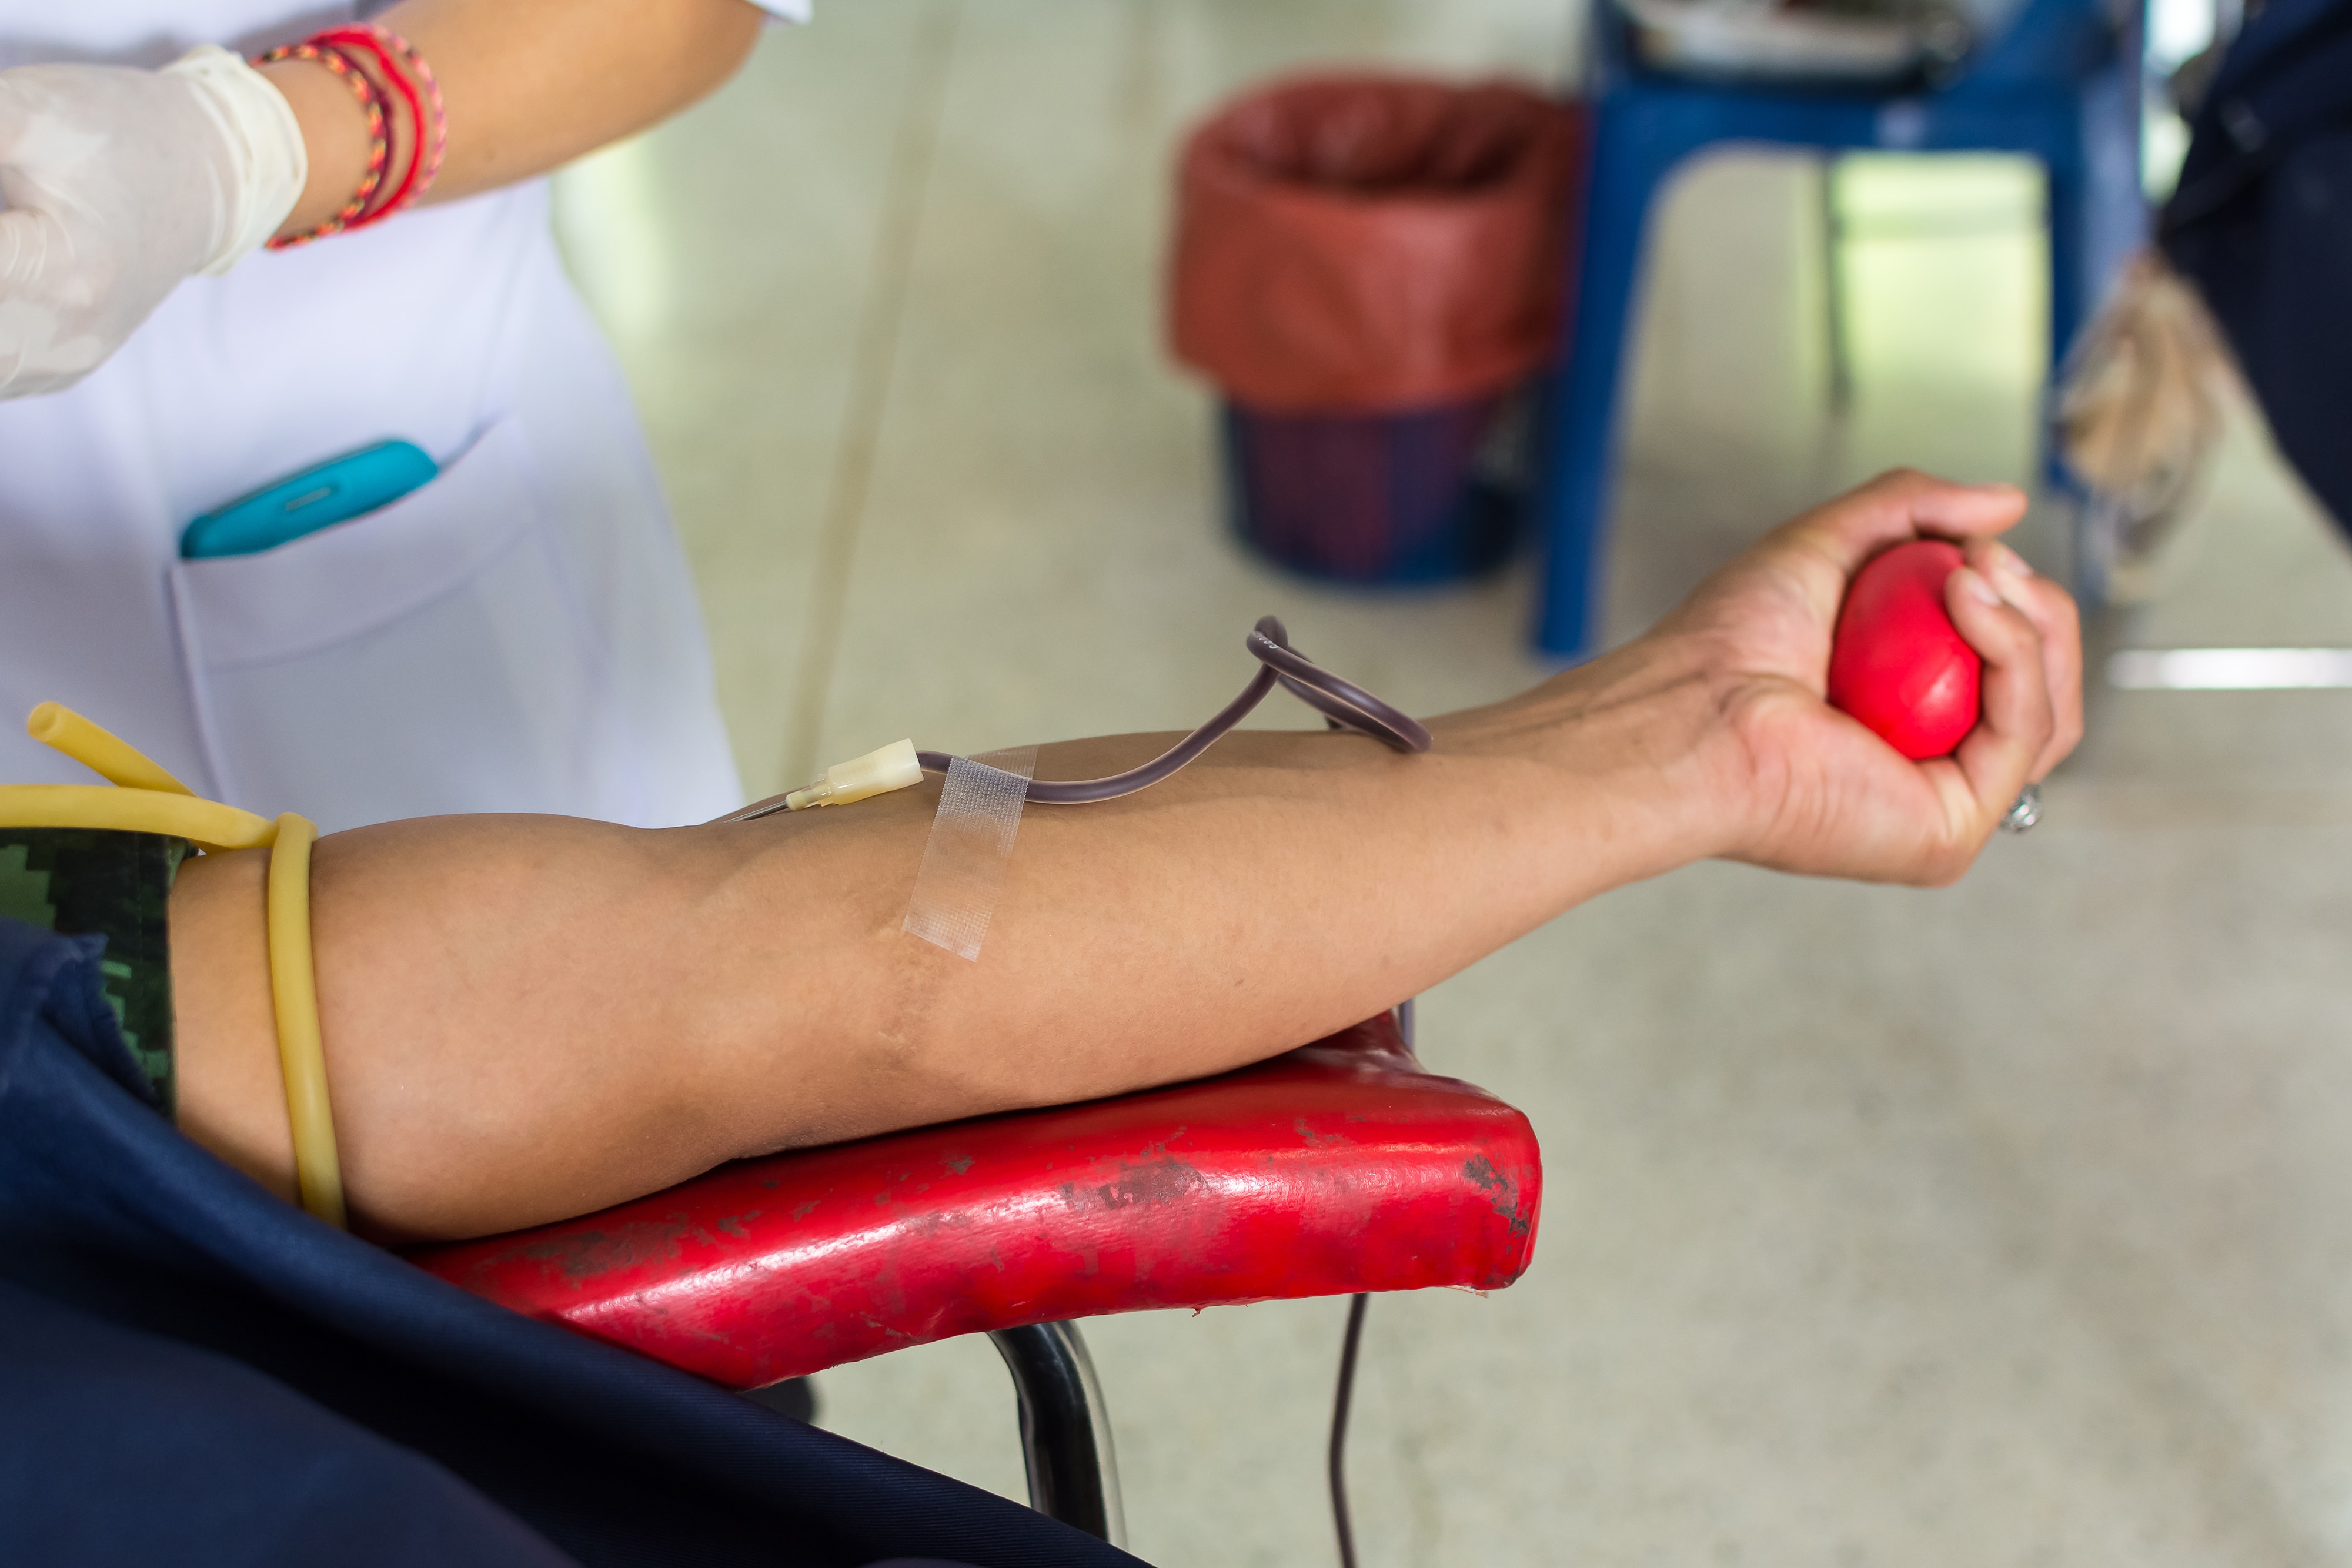 Cropped Image Of A Person During Blood Donation